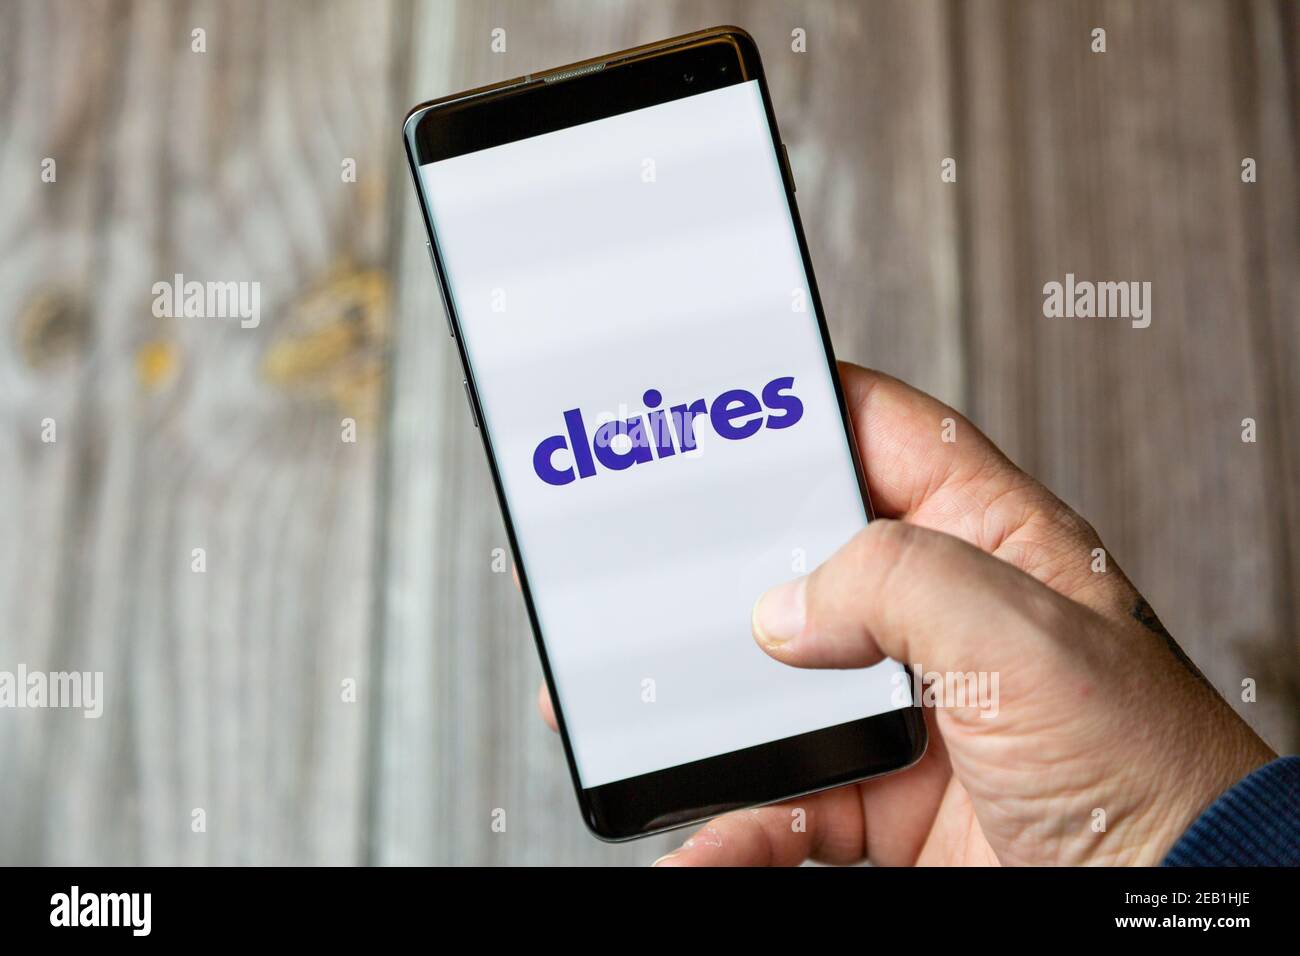 A mobile phone or cell phone being held by a hand with the Claires app open on screen Stock Photo